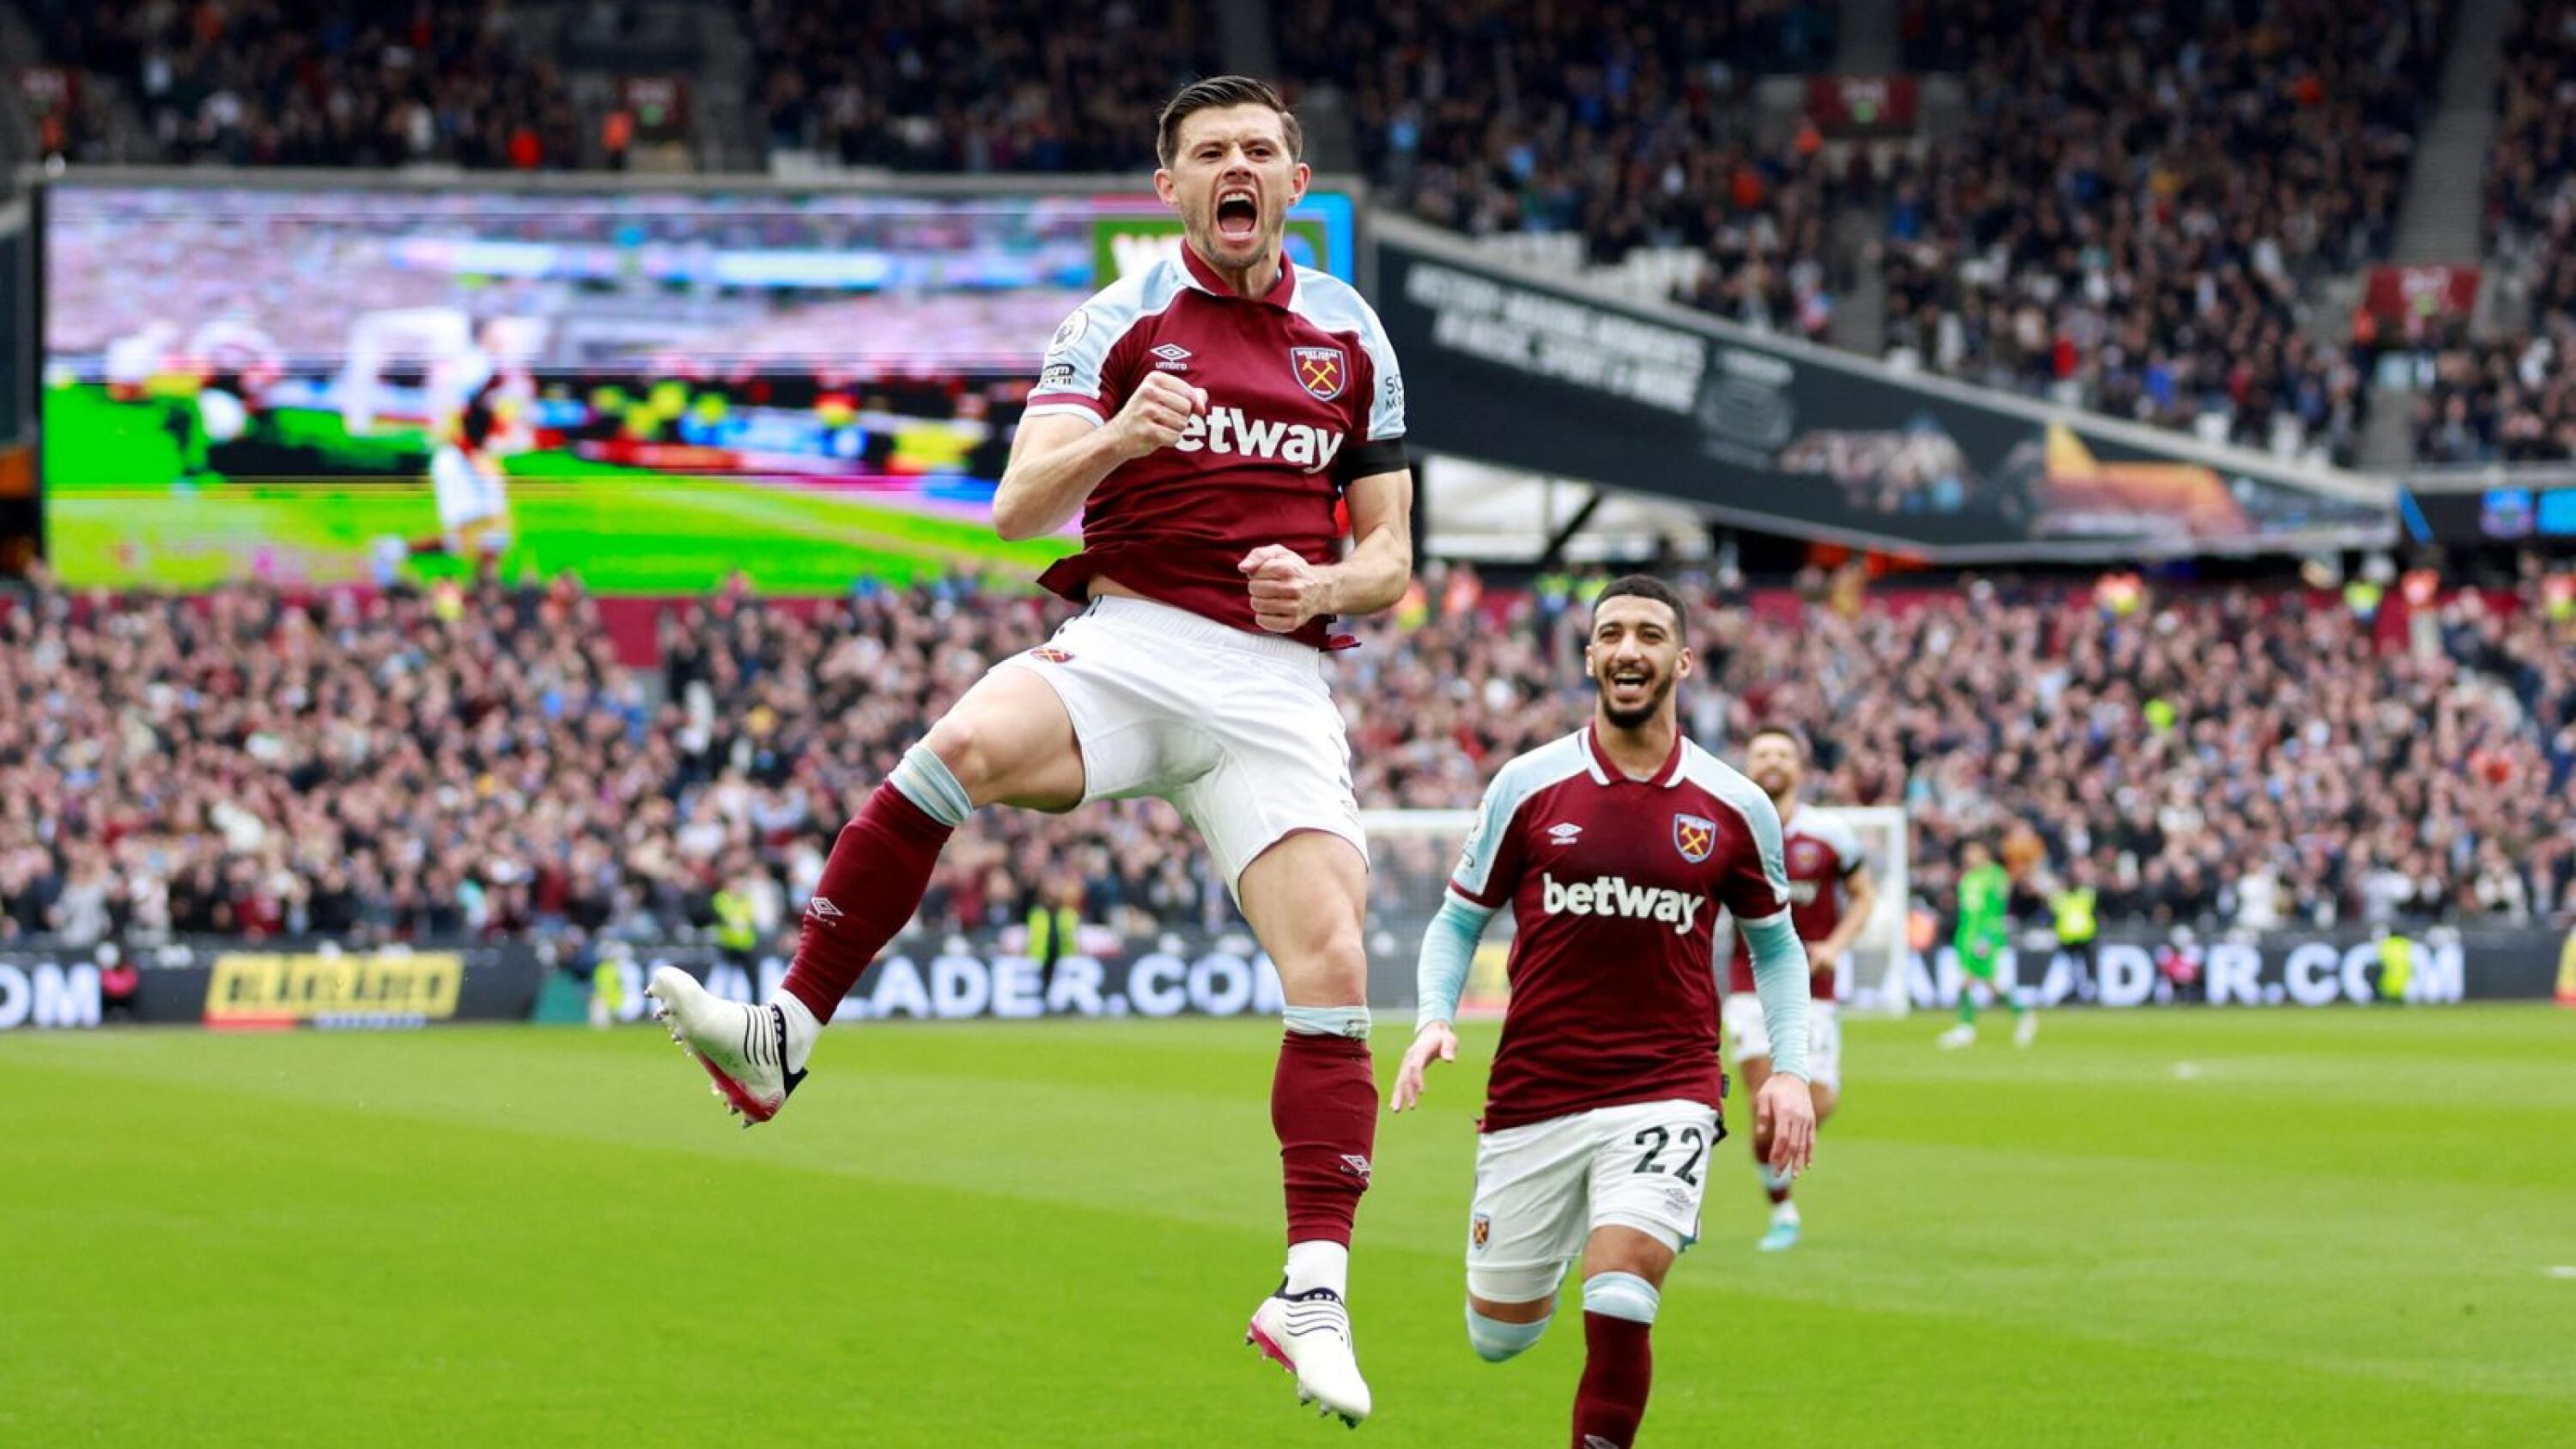 West Ham United's Aaron Cresswell celebrates with Said Benrahma after scoring their first goal during their Premier League game against Everton at London Stadium on Sunday